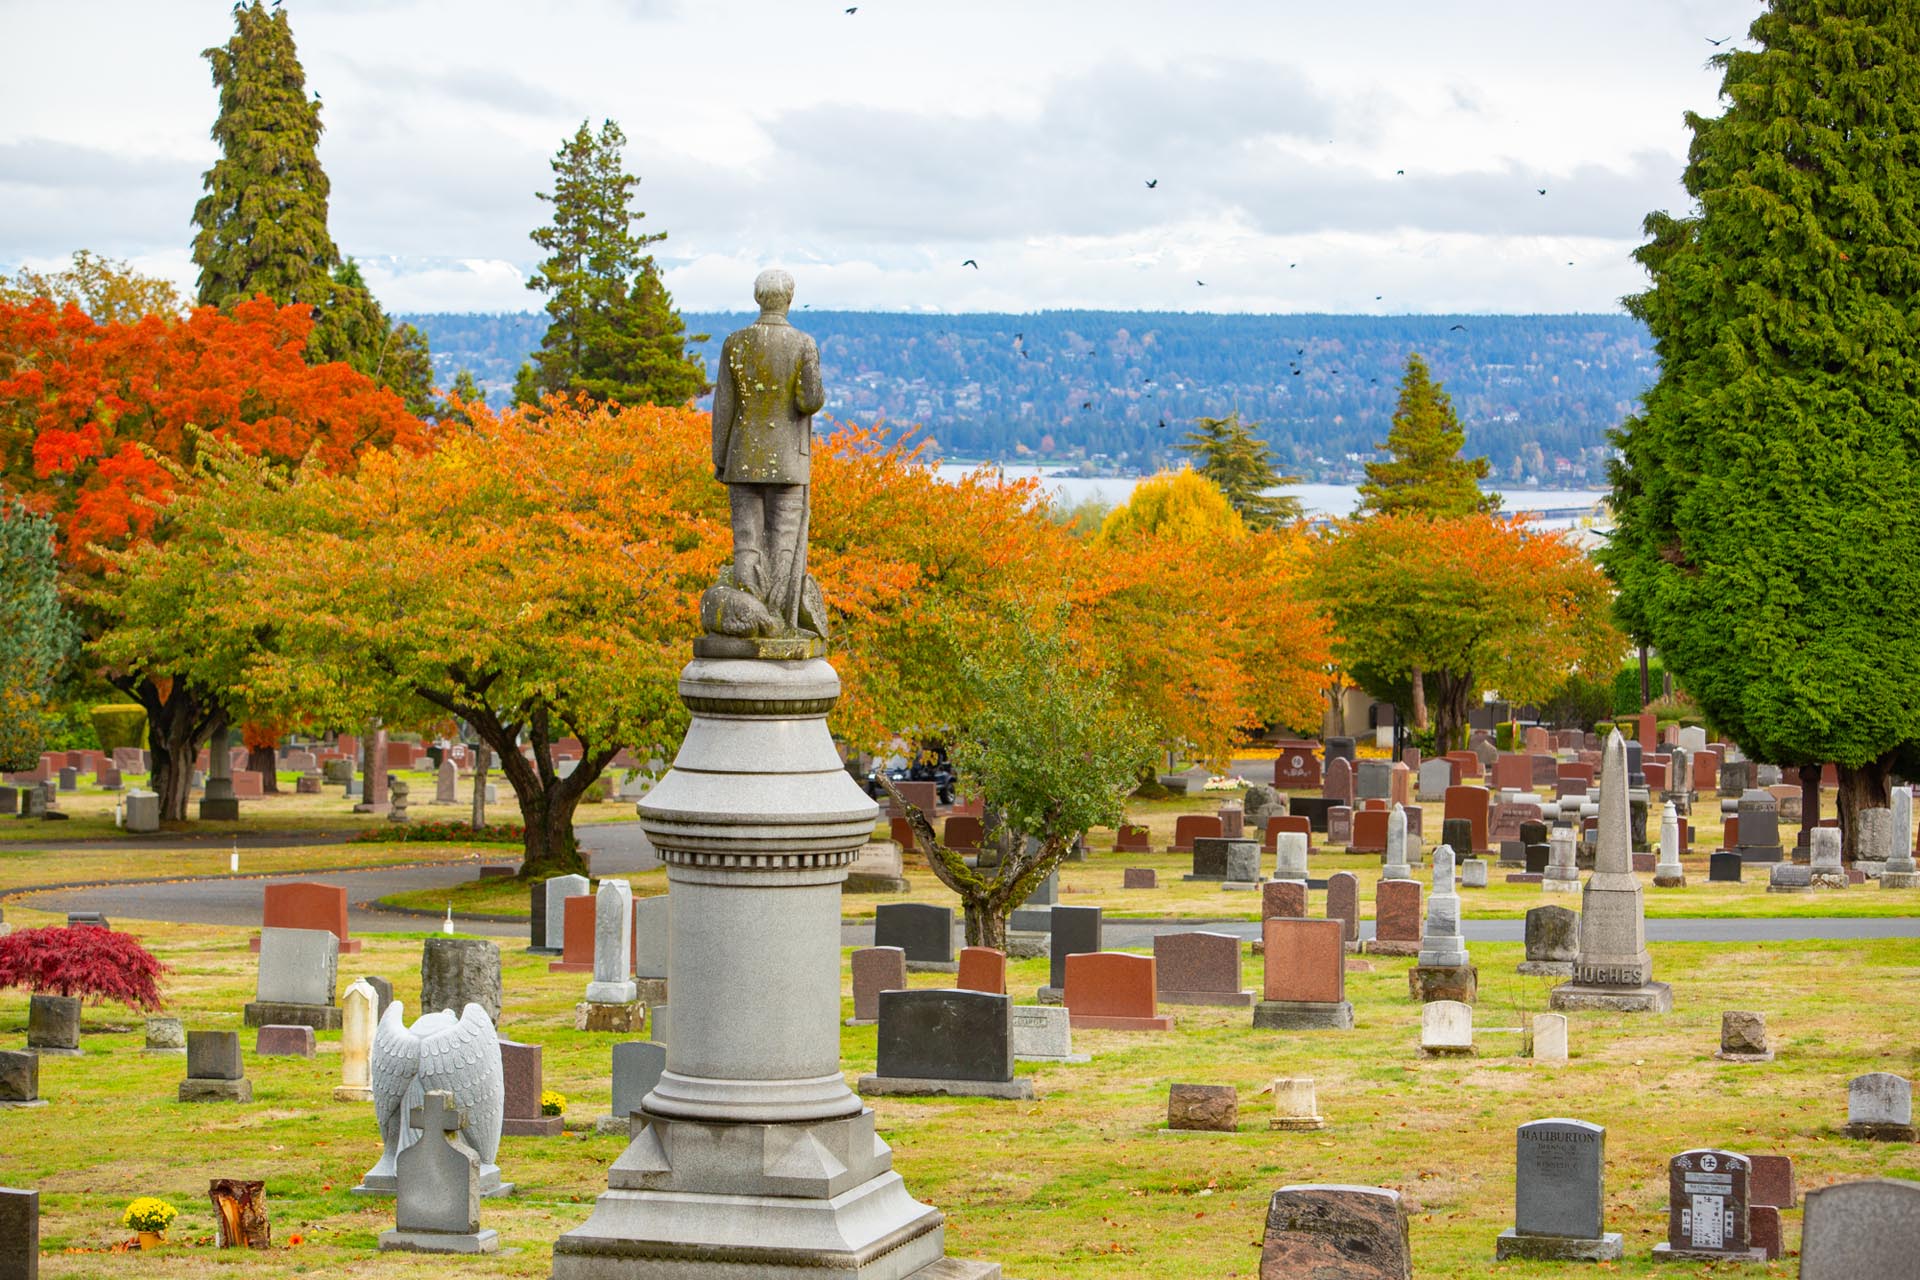 view of the lake from the cemetery over the autumn-colored leaves